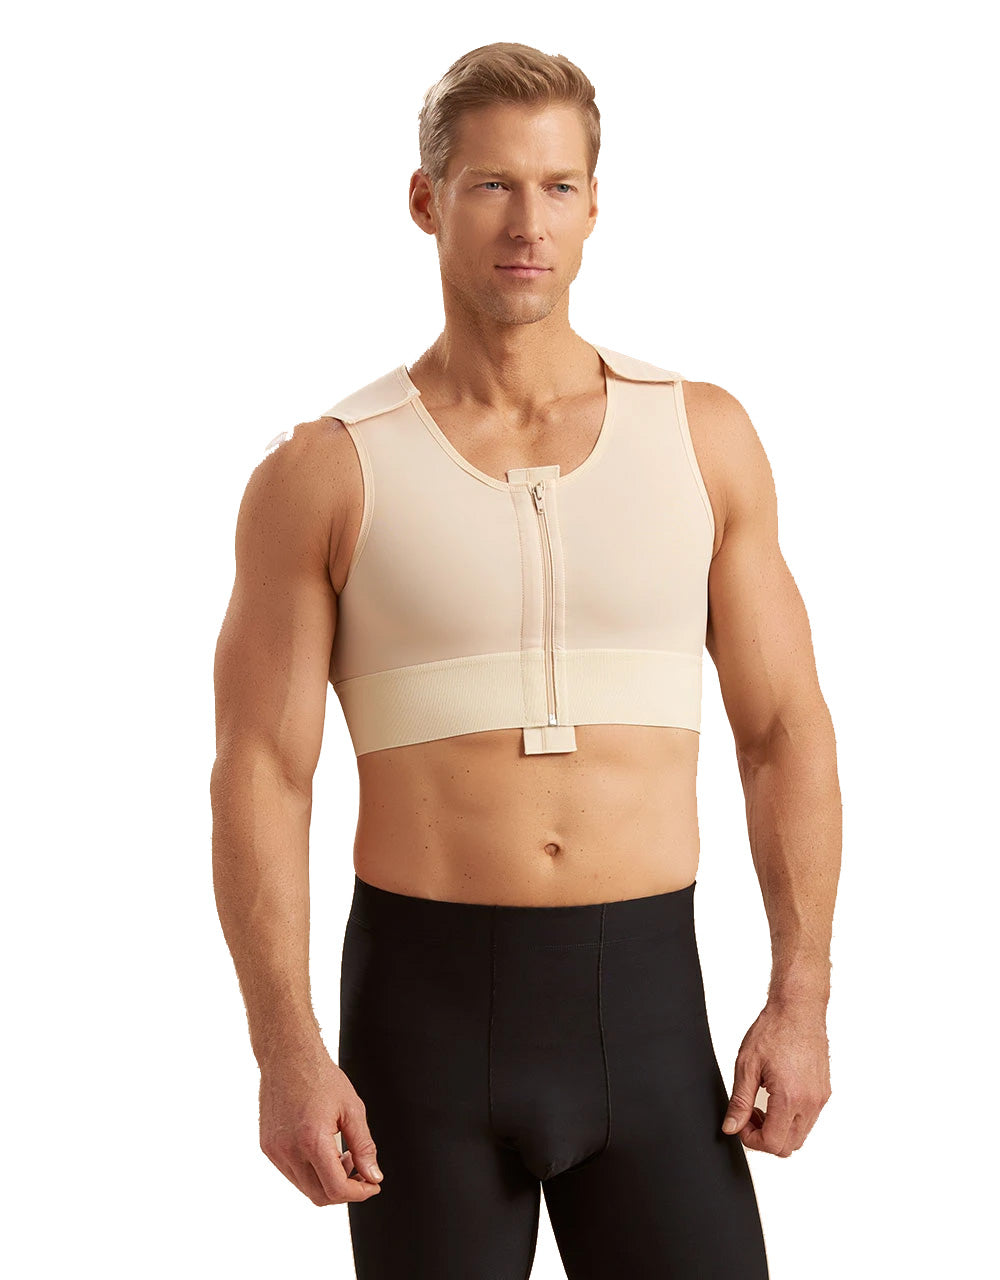  MARENA MV Recovery Men's Compression Vest Post-Surgical Support  - XS, Black : Clothing, Shoes & Jewelry